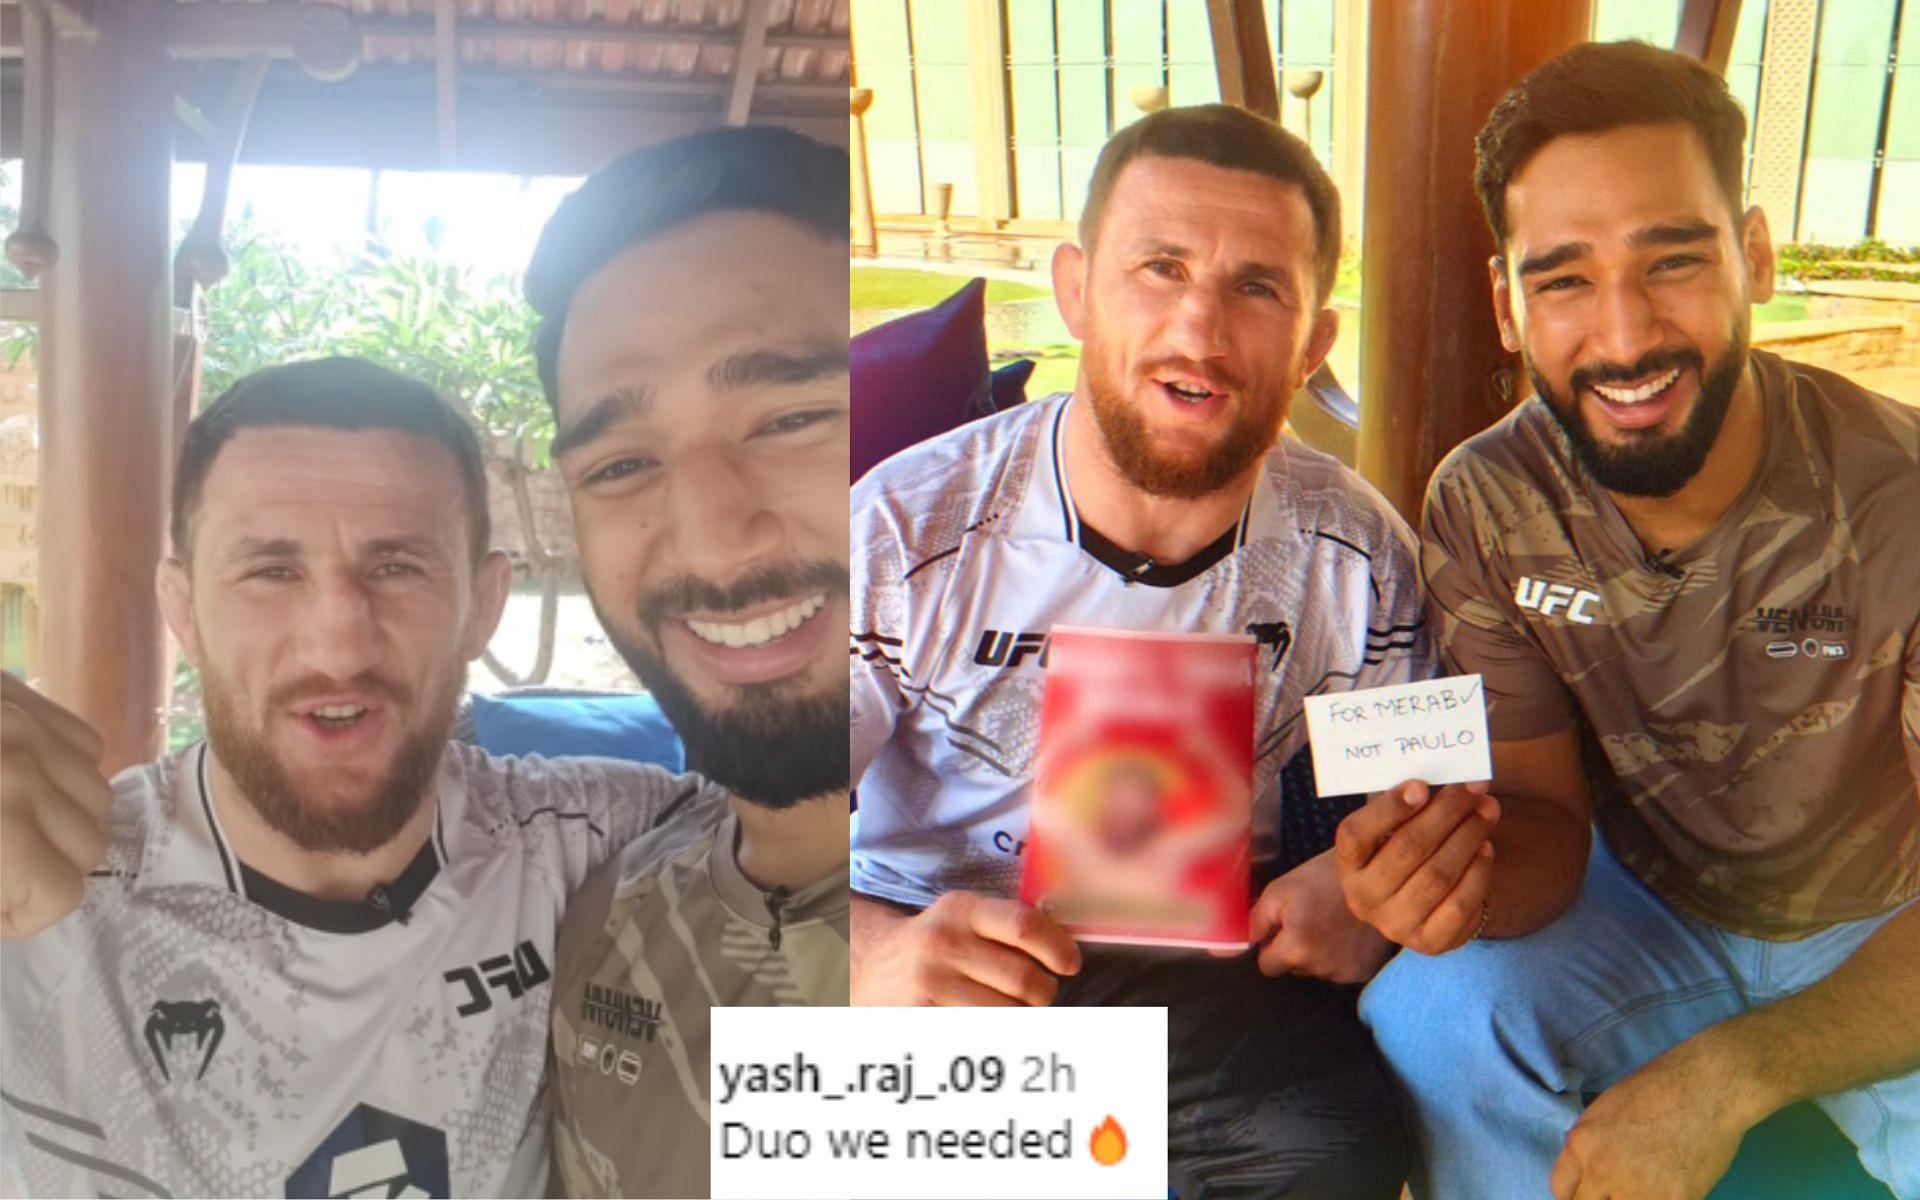 Merab Dvalishvili (far left) and Anshul Jubli (far right) pictured together in Mumbai for a UFC fan meet-and-greet [Images Courtesy: @ufcindia on Instagram]